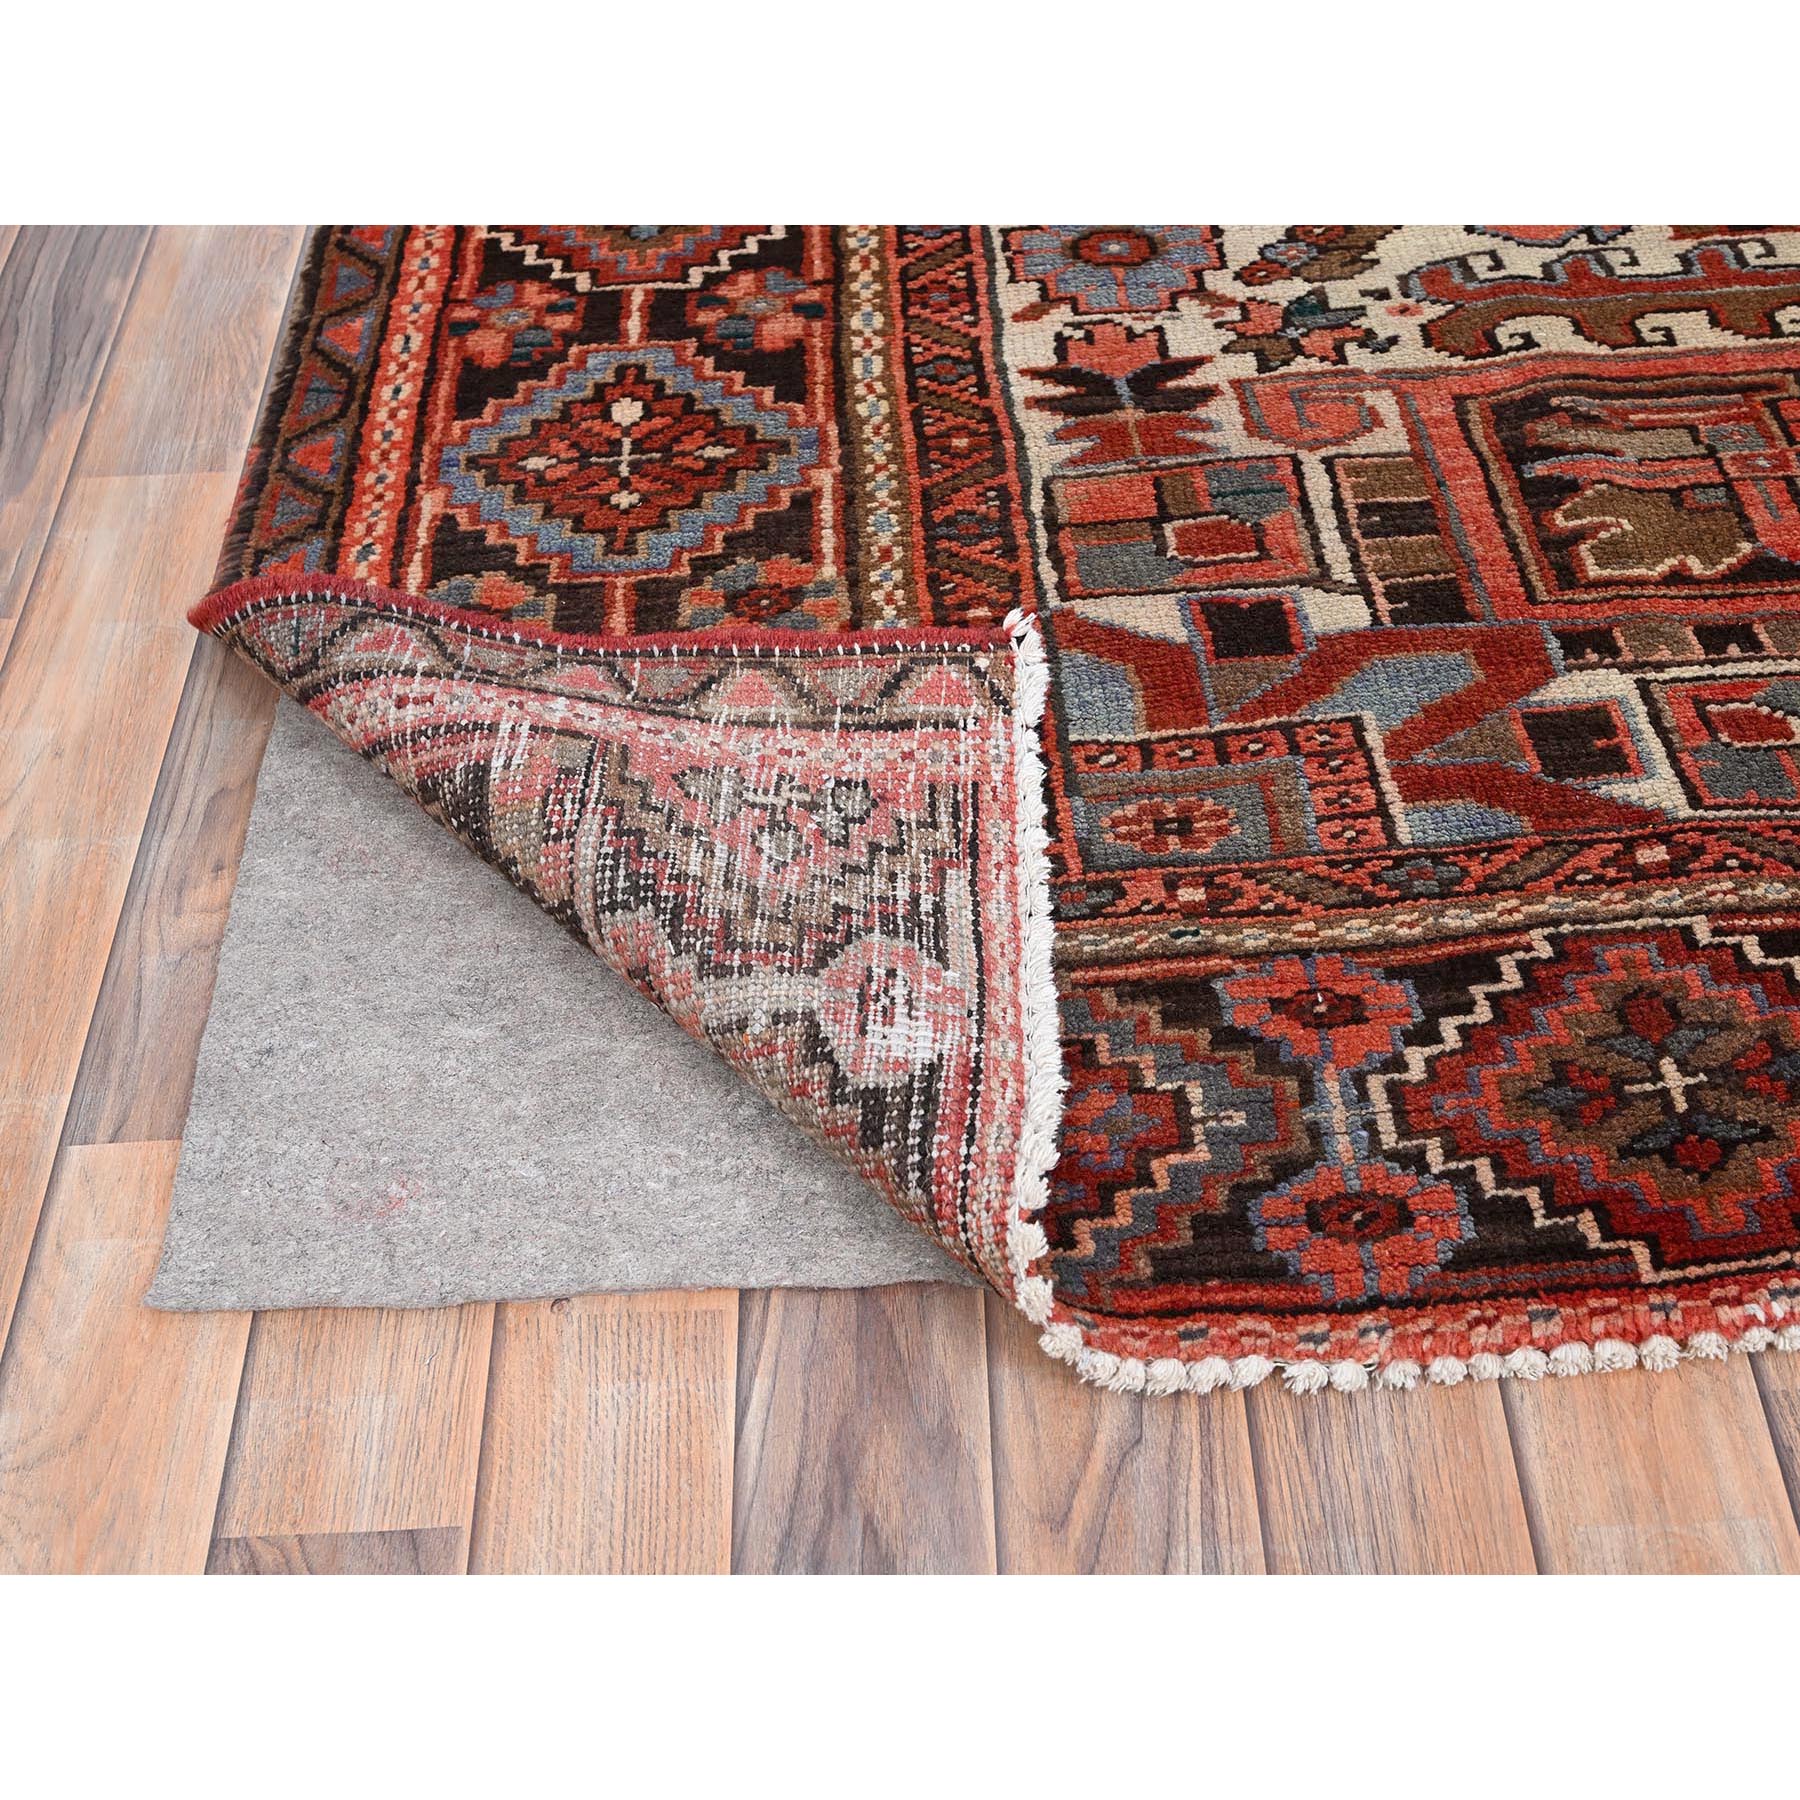 9'9"x11'7" Rust Red, Good Condition, Distressed Look, Pure Wool, Hand Woven, Semi Antique Persian Heriz, Oriental Rug 